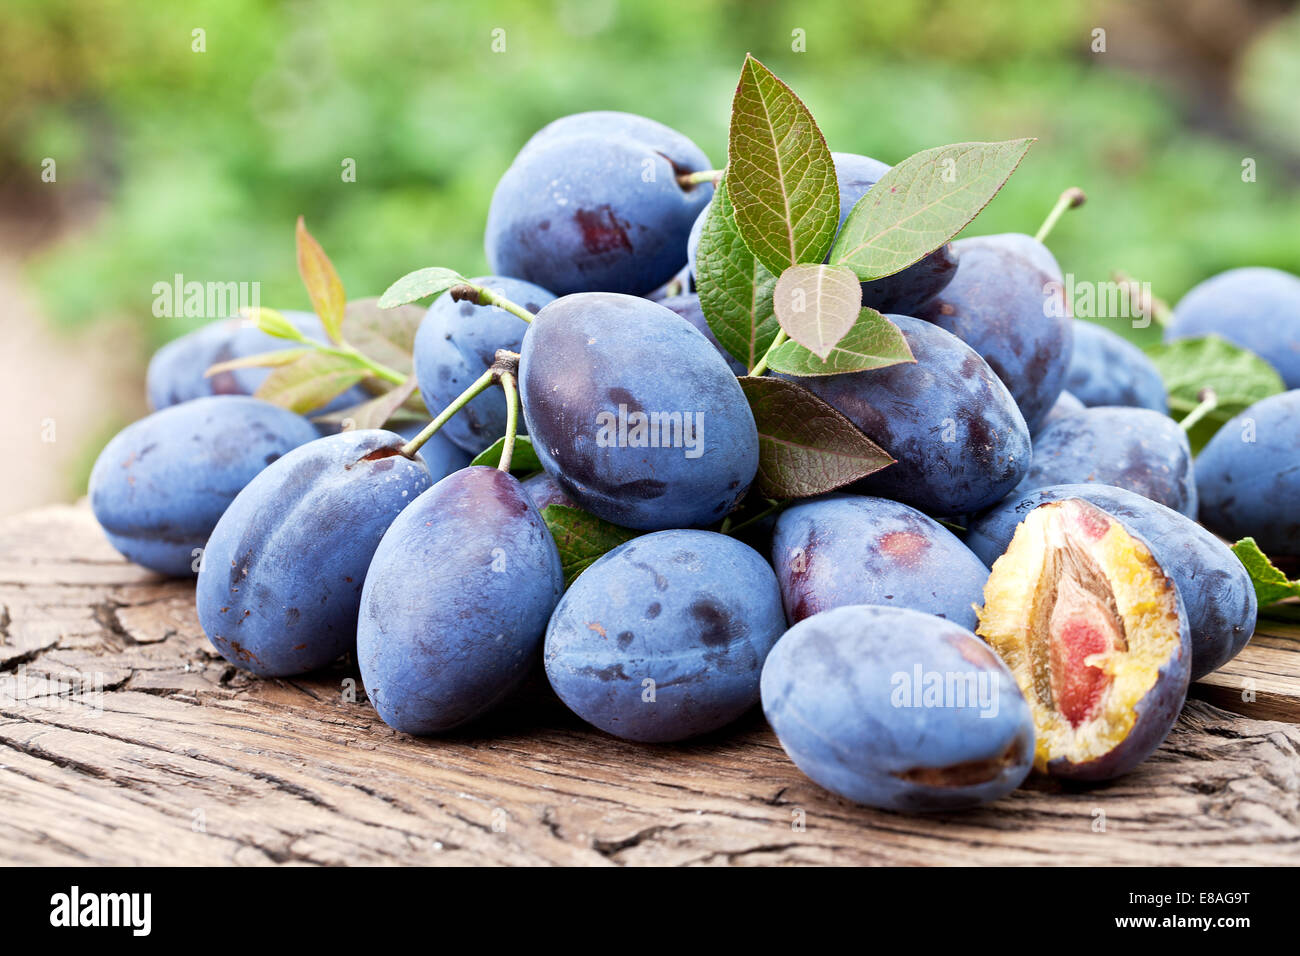 Plums on an old wooden table in the garden. Stock Photo